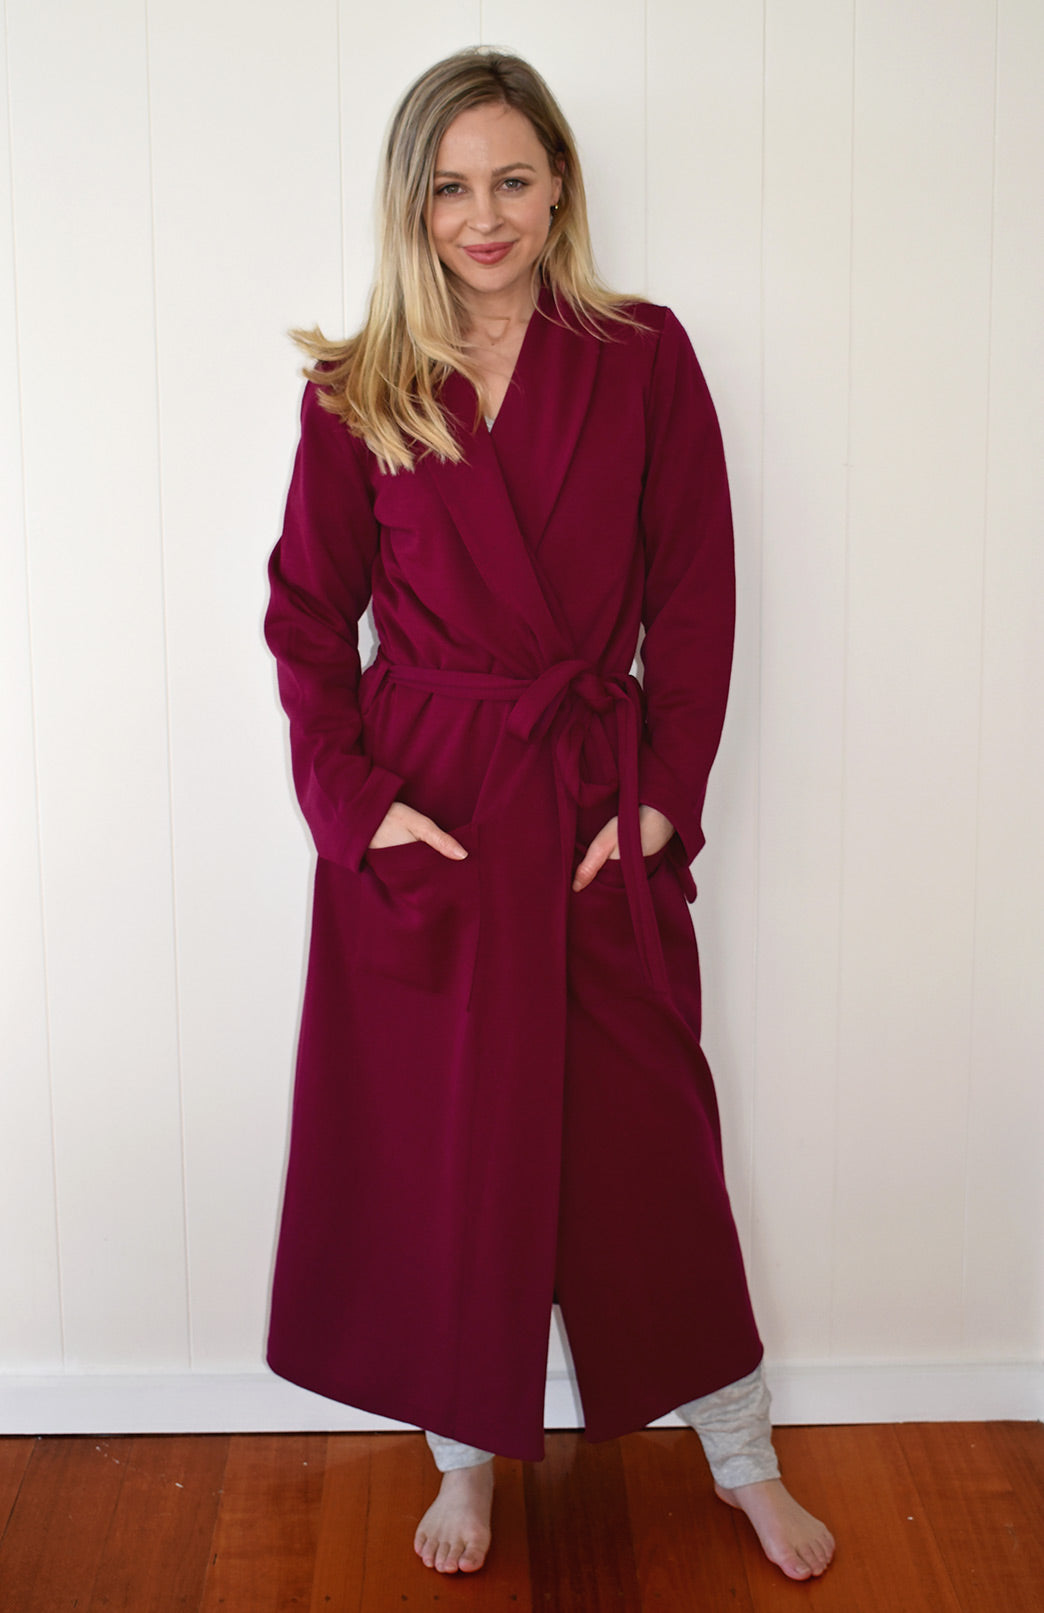 Details more than 95 merino wool dressing gown best